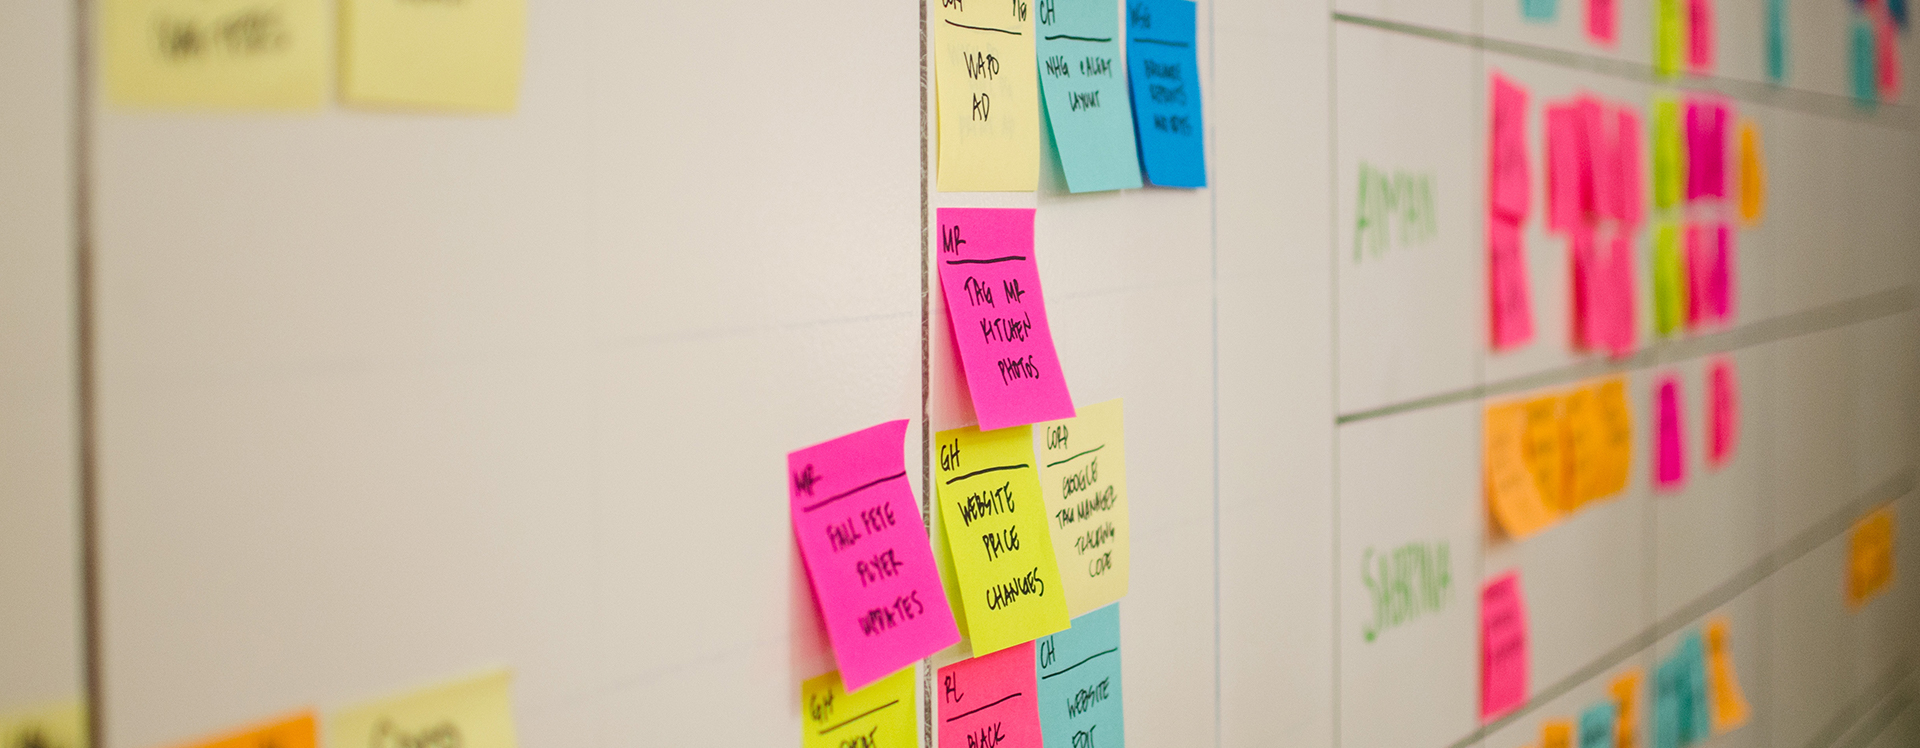 Post it notes on white board for Lighting Chat